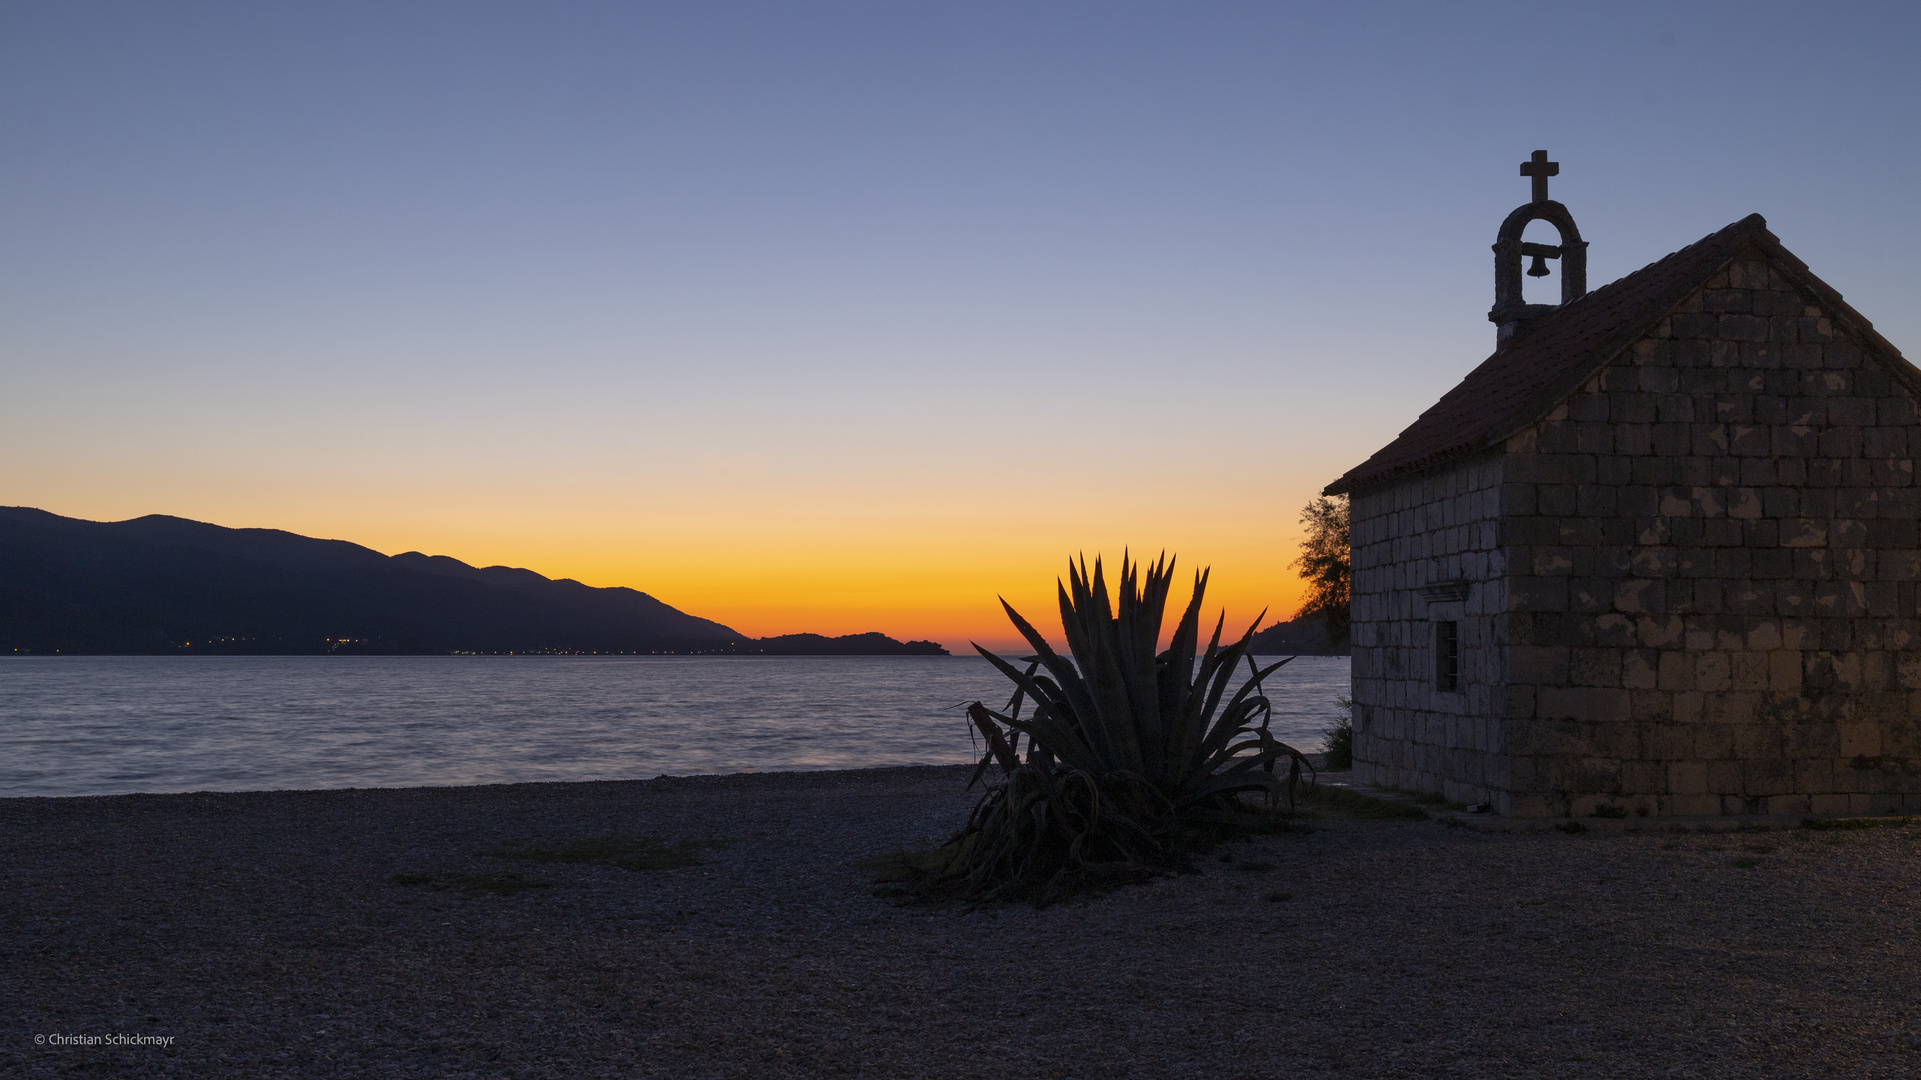 After the sunset in Croatia